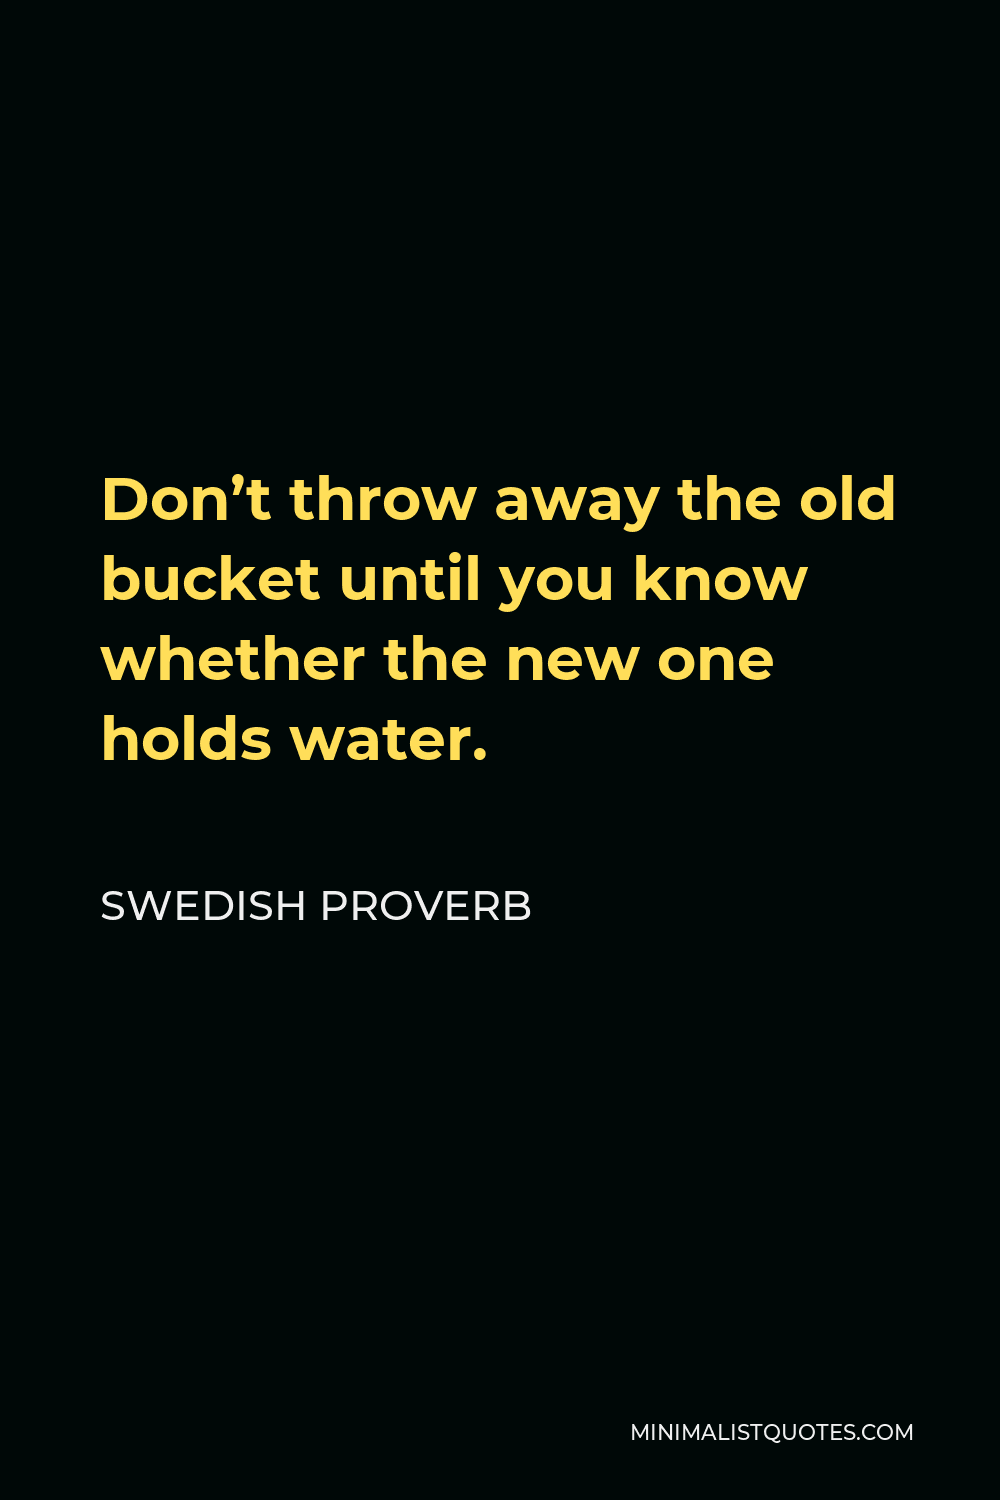 Swedish Proverb Quote - Don’t throw away the old bucket until you know whether the new one holds water.